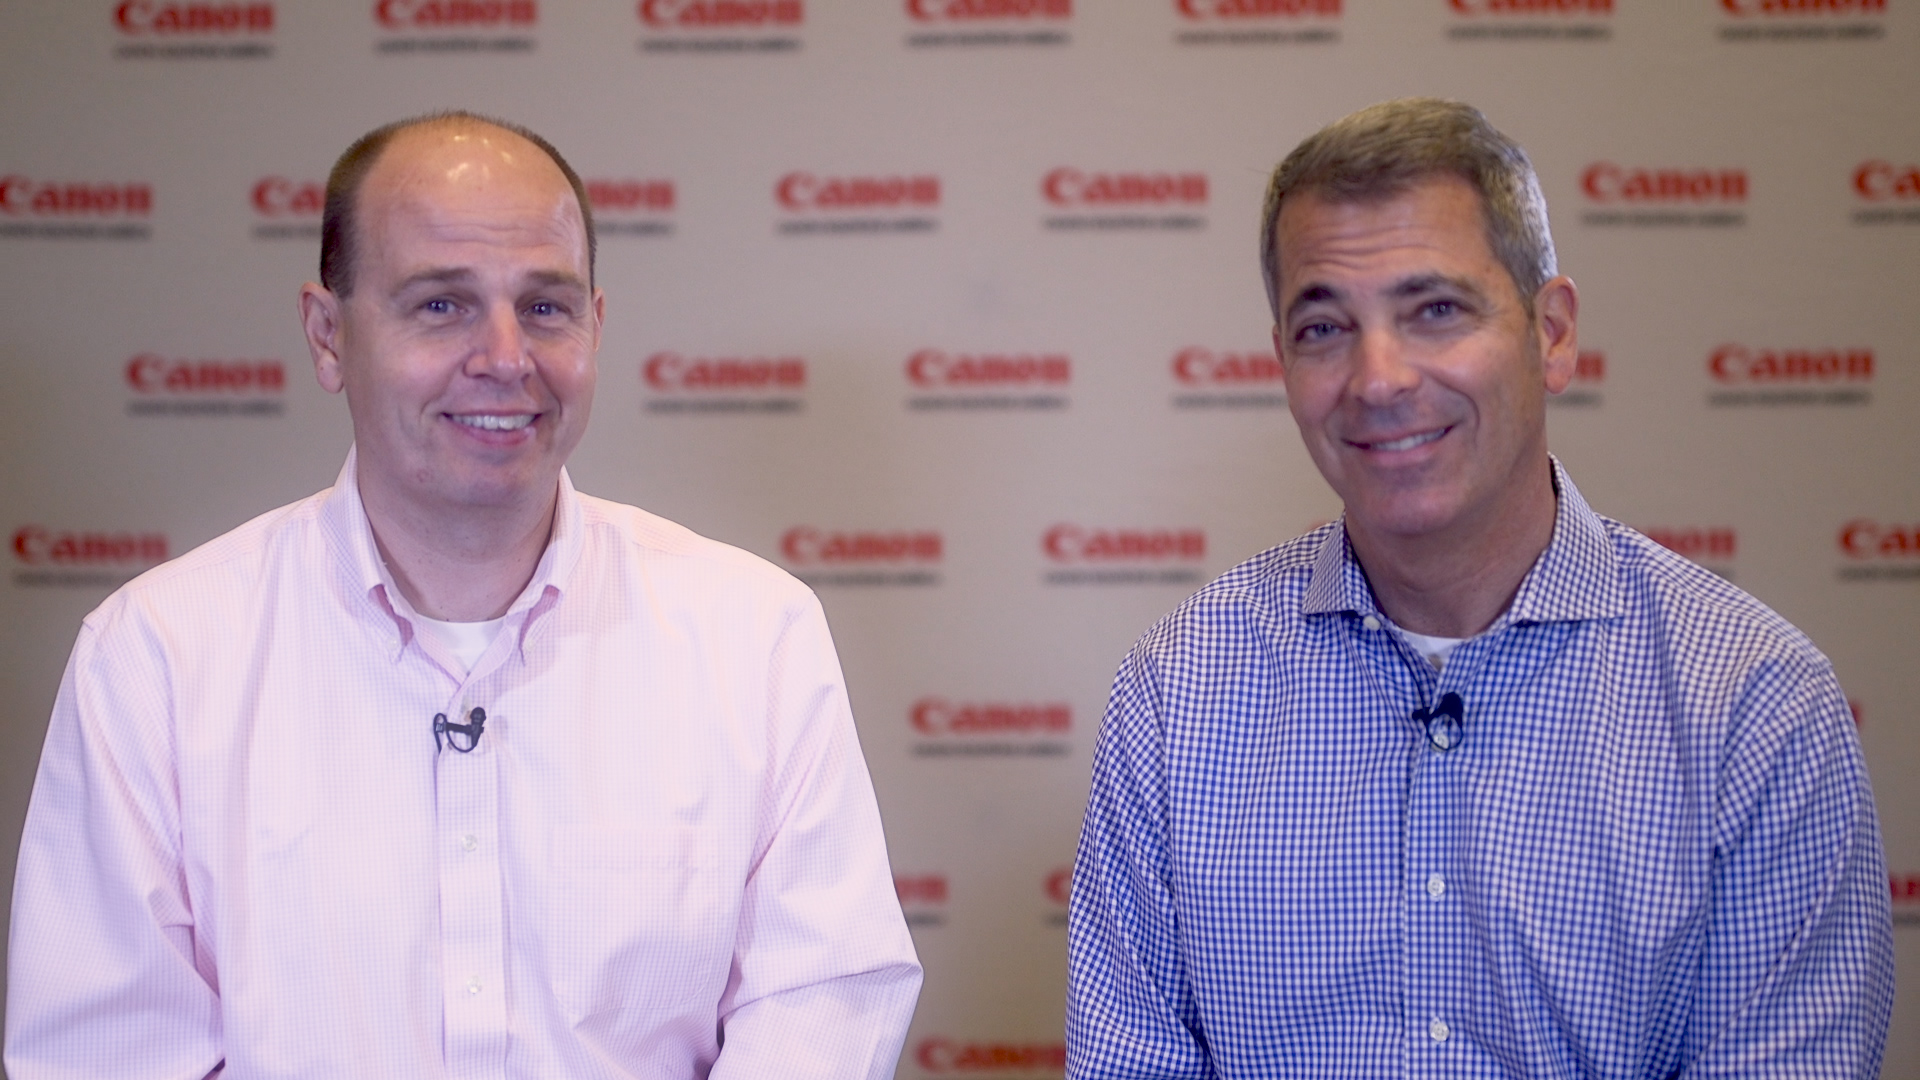 Featured image for “Canon Invests in Field-Upgradable Inkjet – Video”